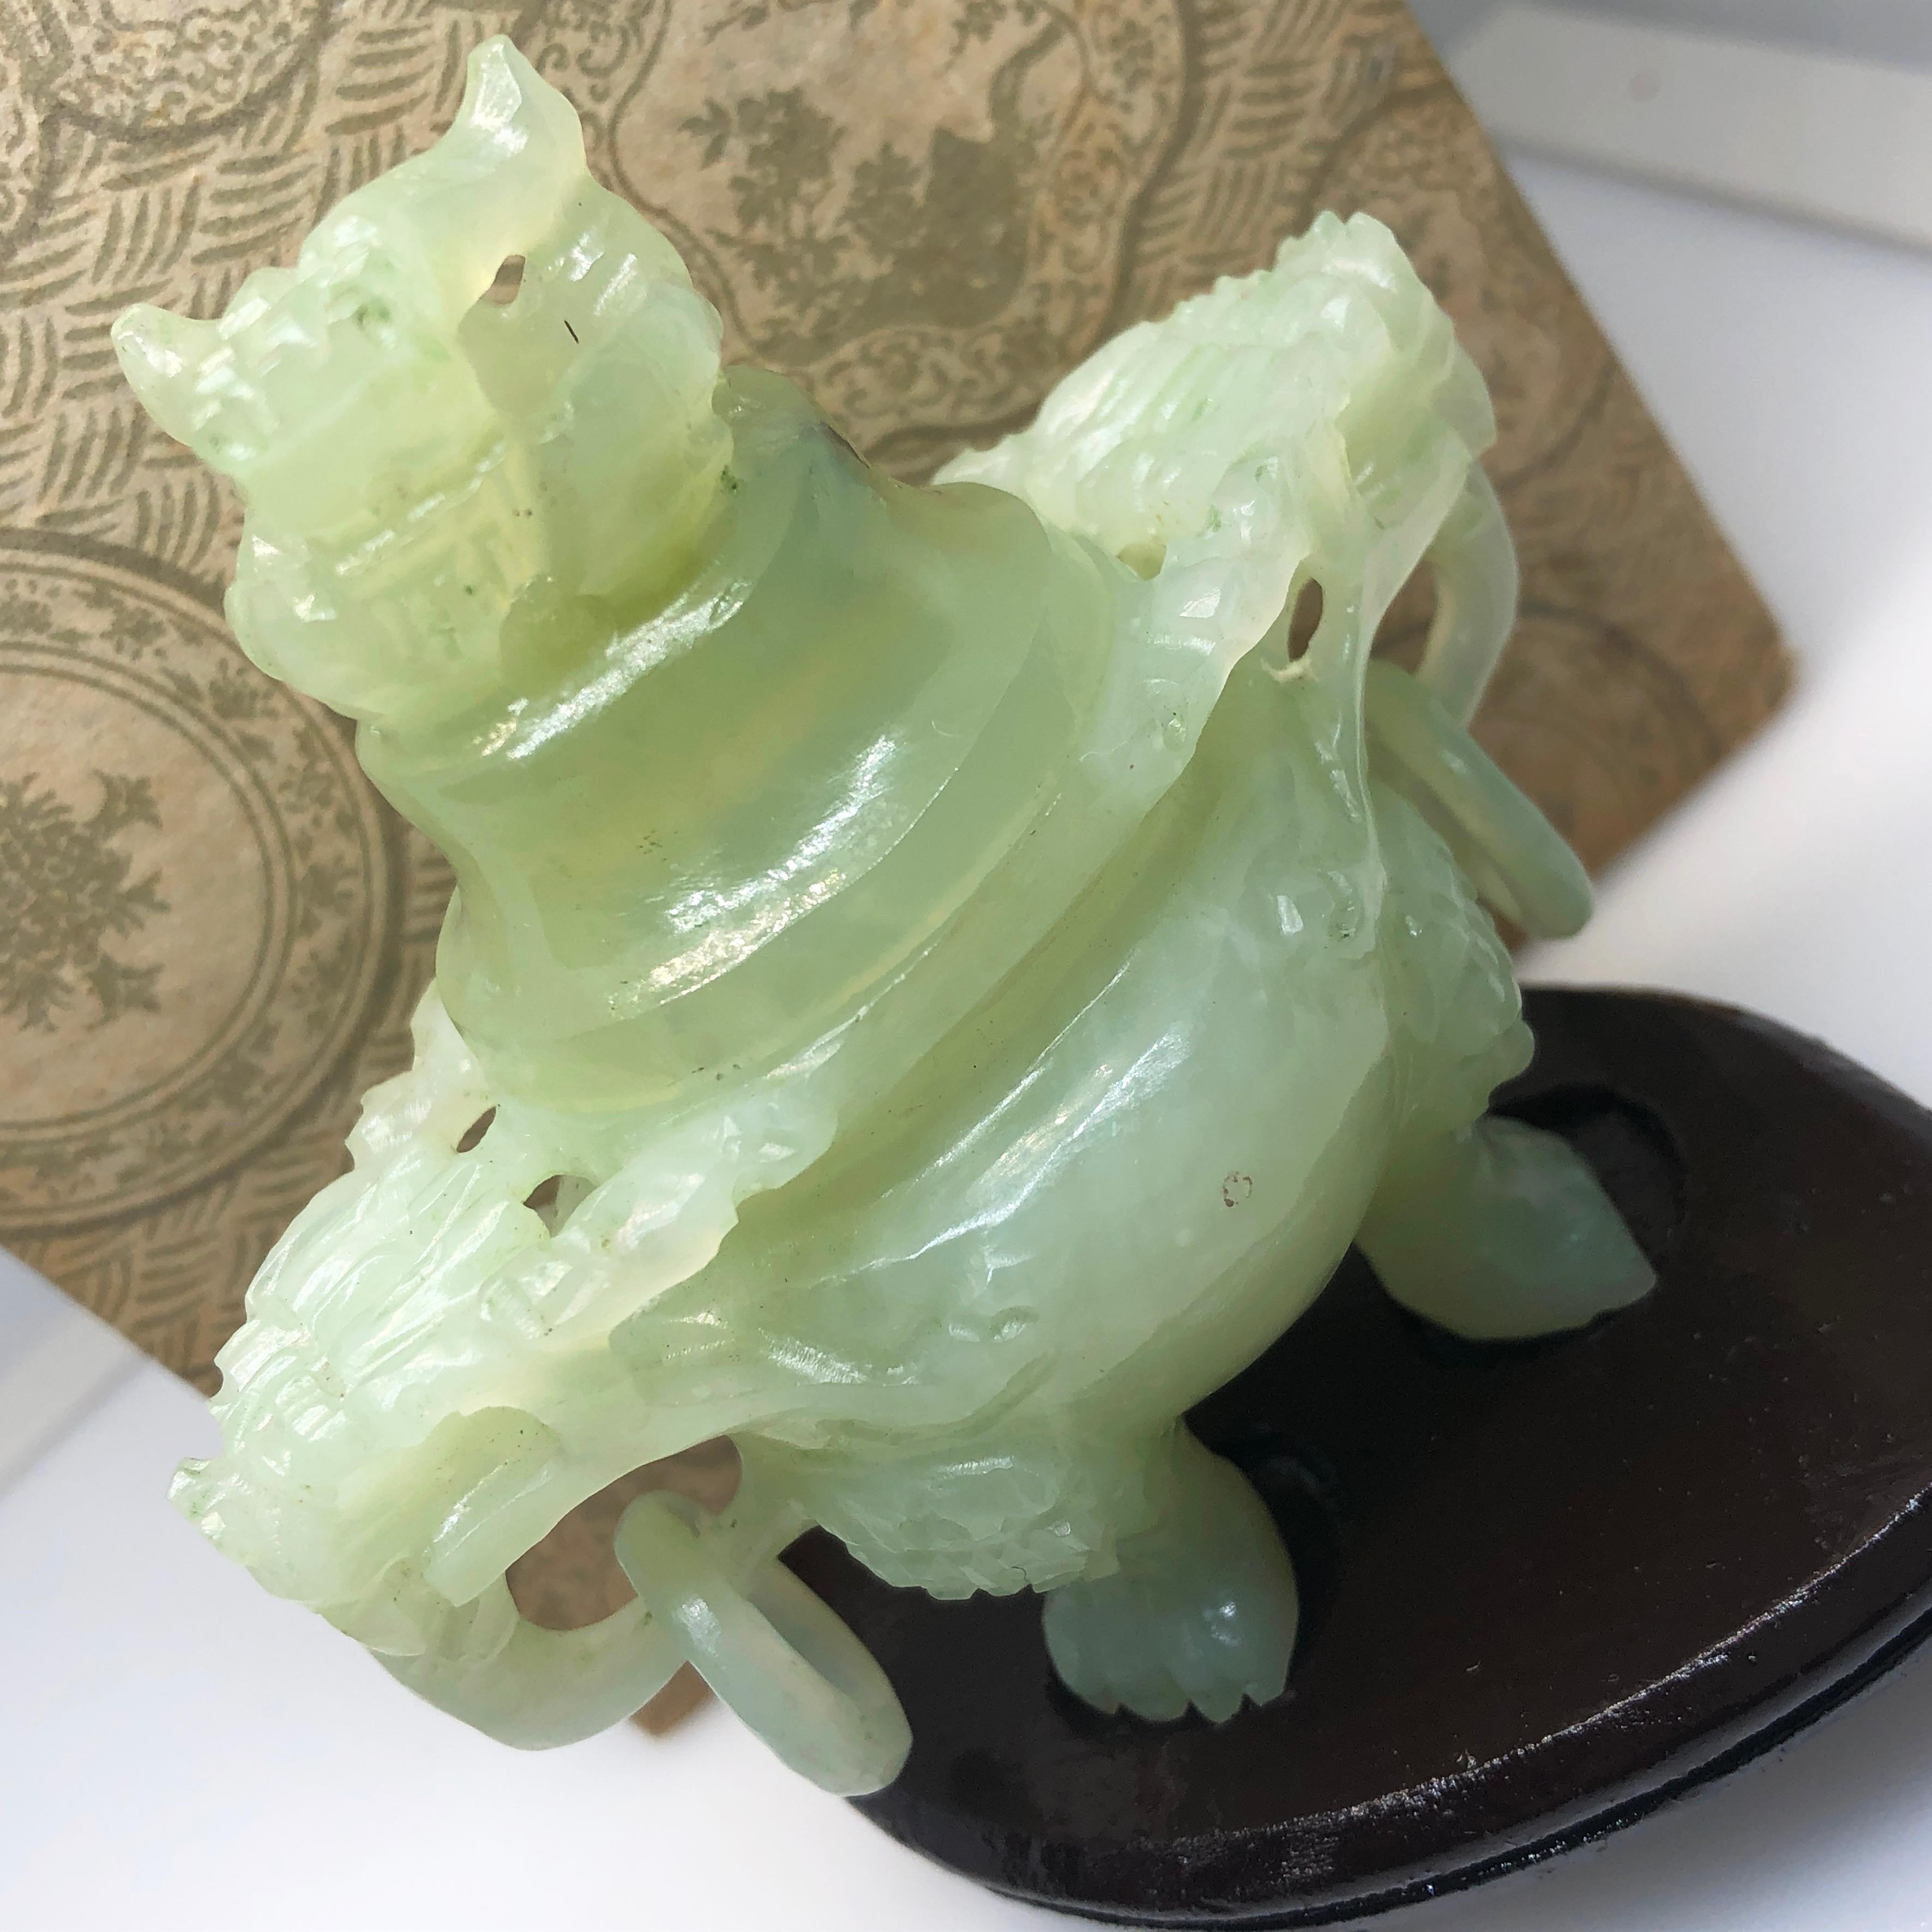 One-of-a-kind, Original 1930, Chinese Export Natural Pale Jade Perfume Burner. Hand Carving and Engraving Work is Beautiffully Crisp and Detailed.
This Unique Piece is still in excellent conditions.
With a wood fitted stand and chinese fitted